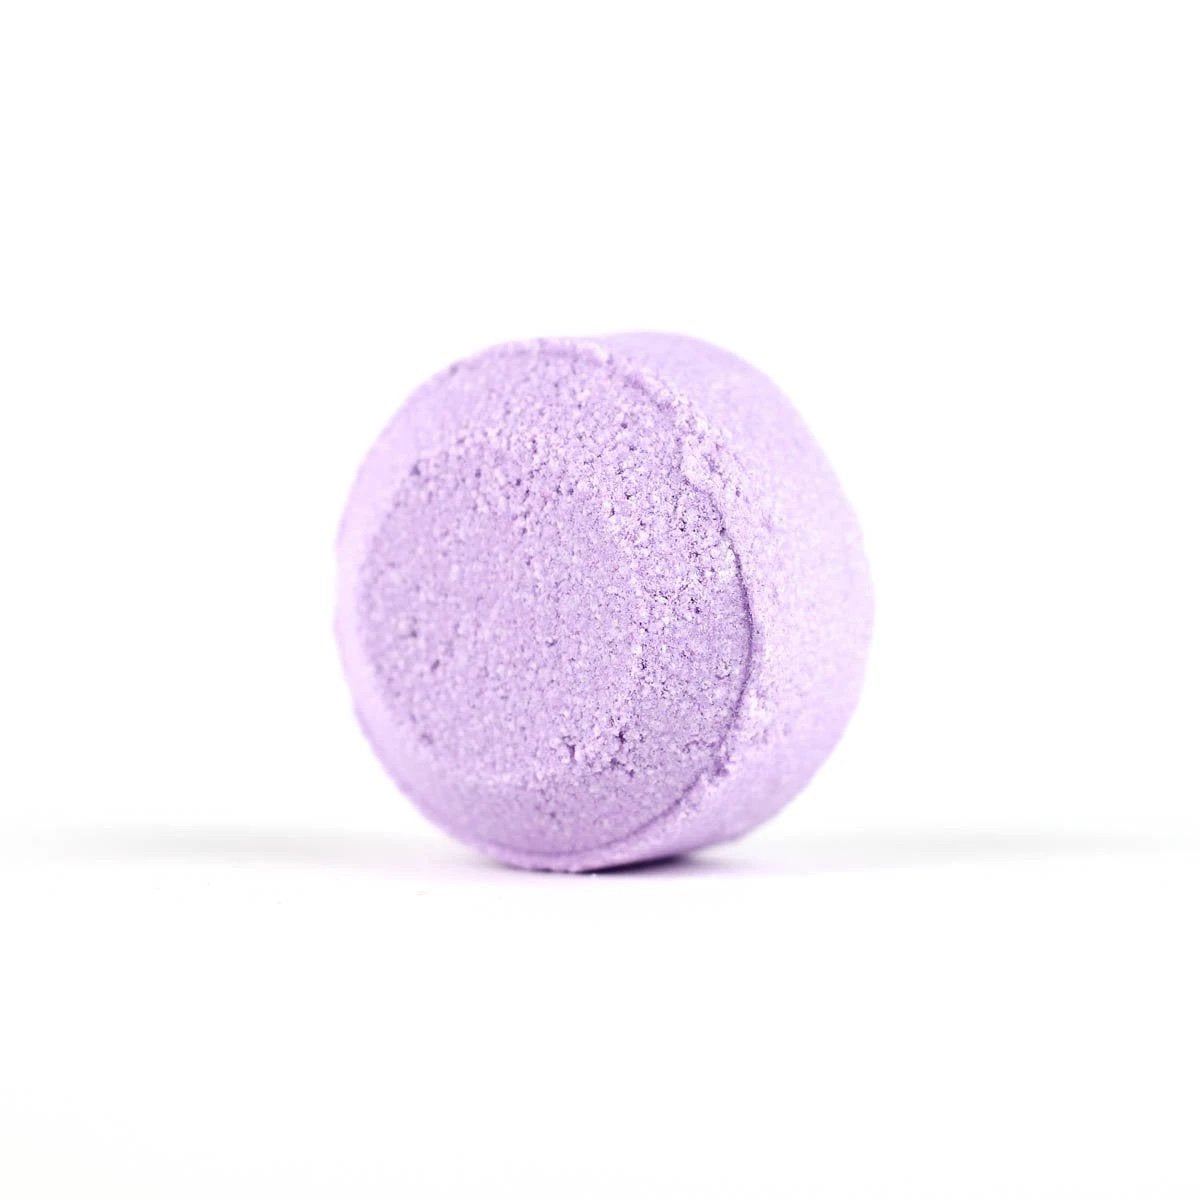 A single Spinster Sisters Lavender Shower Steamer isolated against a white background. Infused with lavender essential oil, the shower steamer has a slightly textured surface, indicating its fizzy quality.